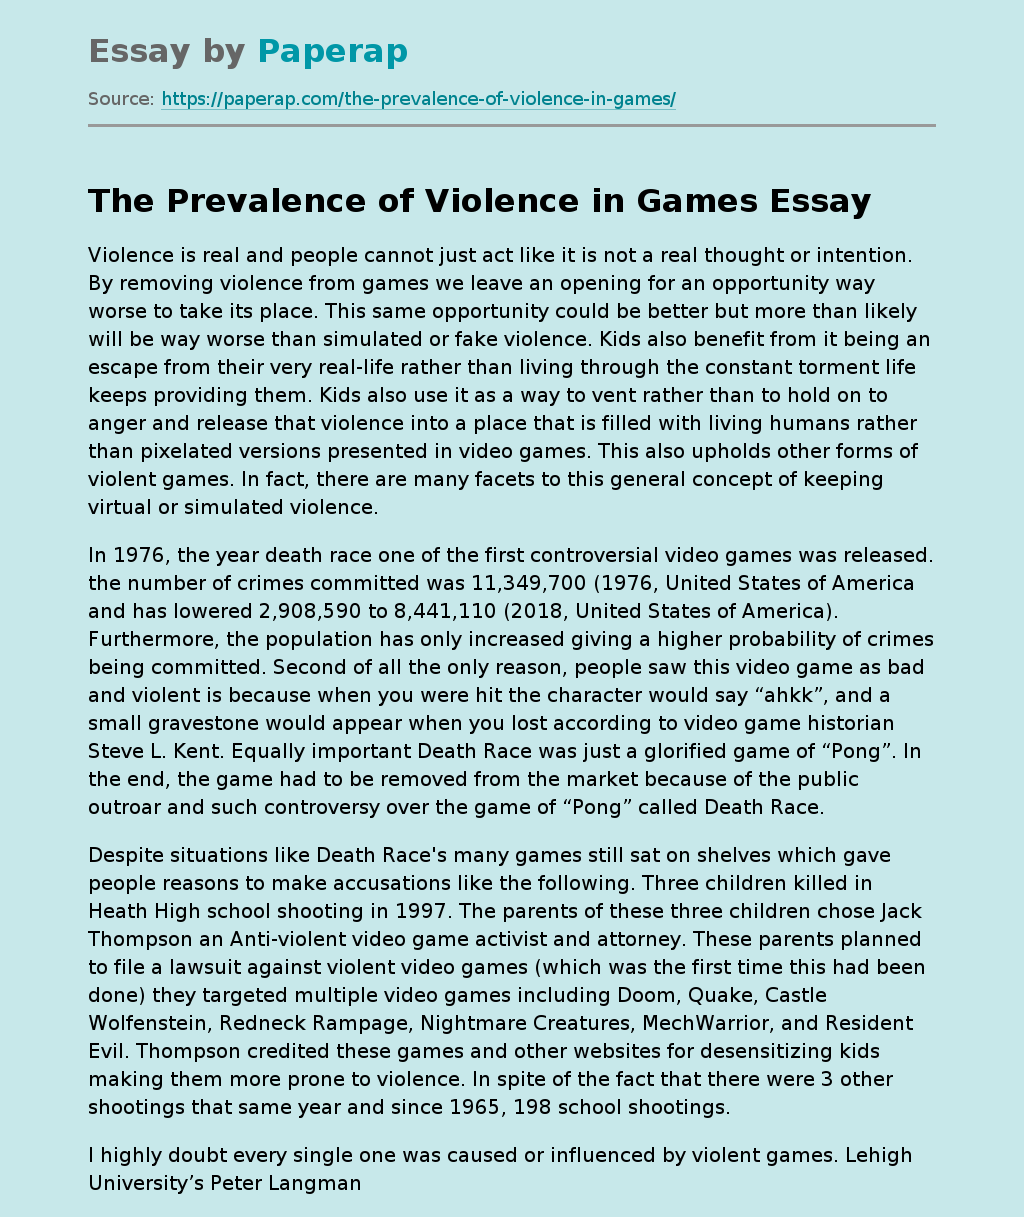 The Prevalence of Violence in Games